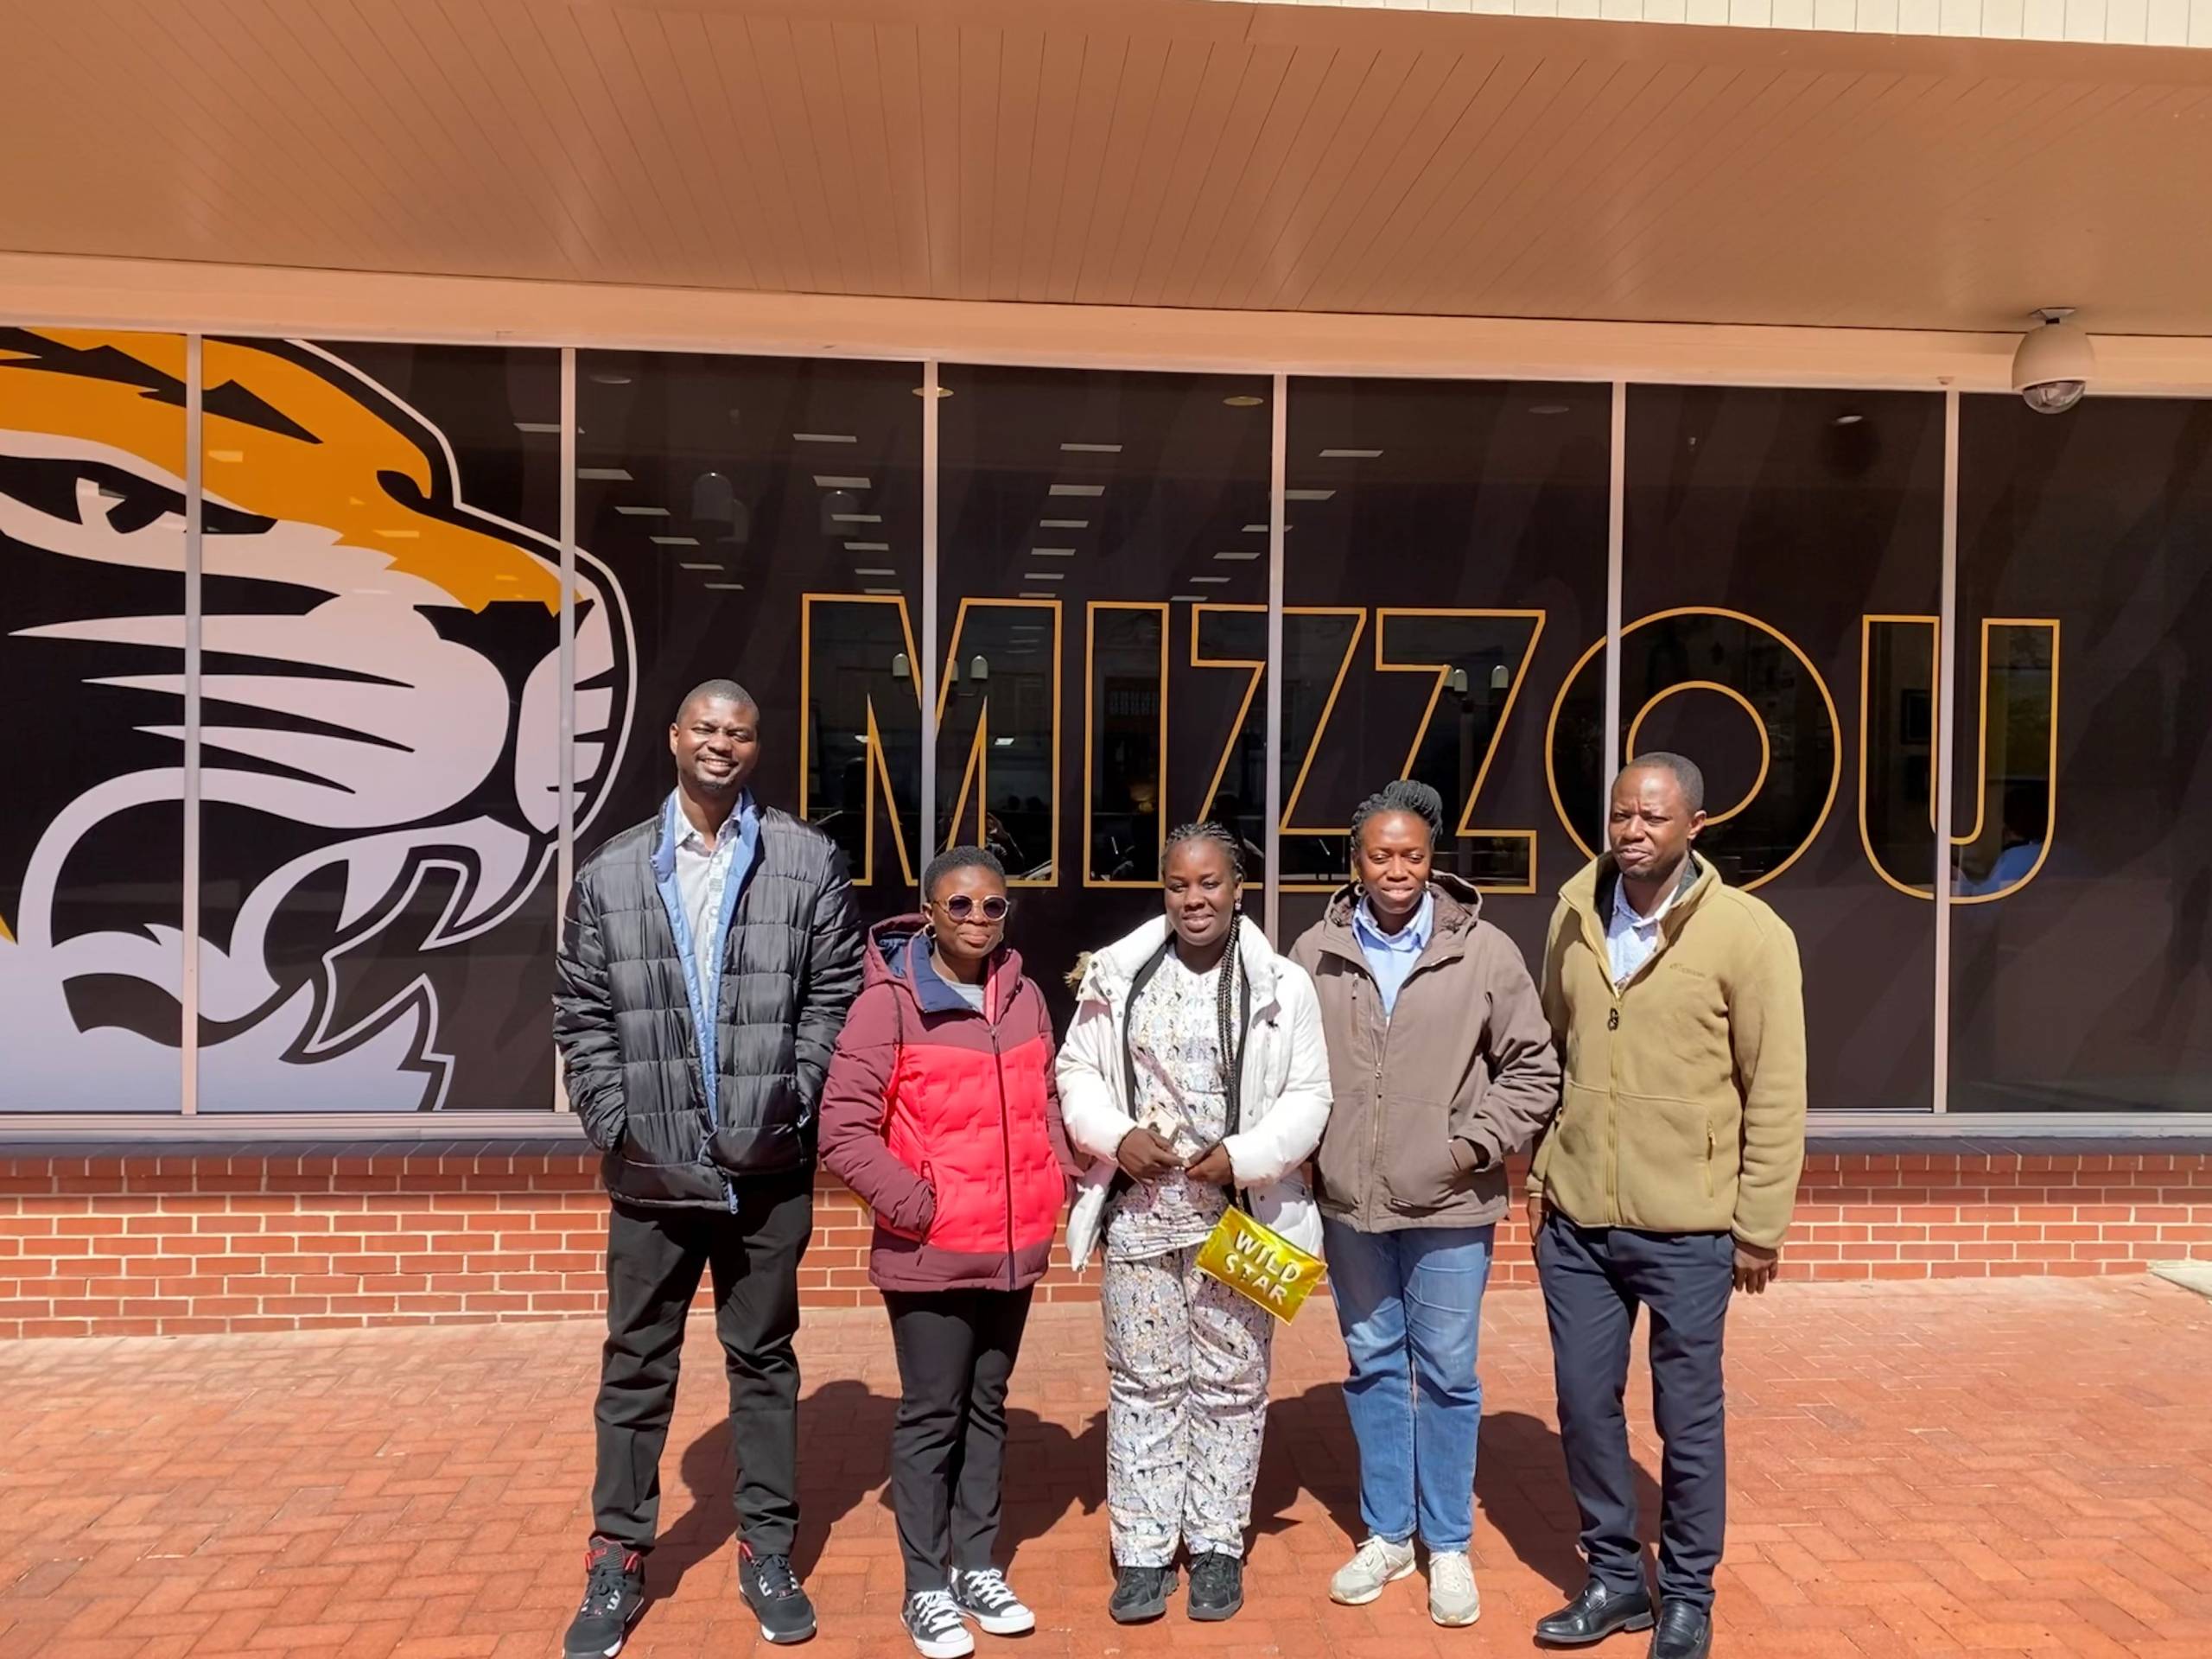 CAFNR International Fellows Welcomed to Mizzou Campus (click to read)